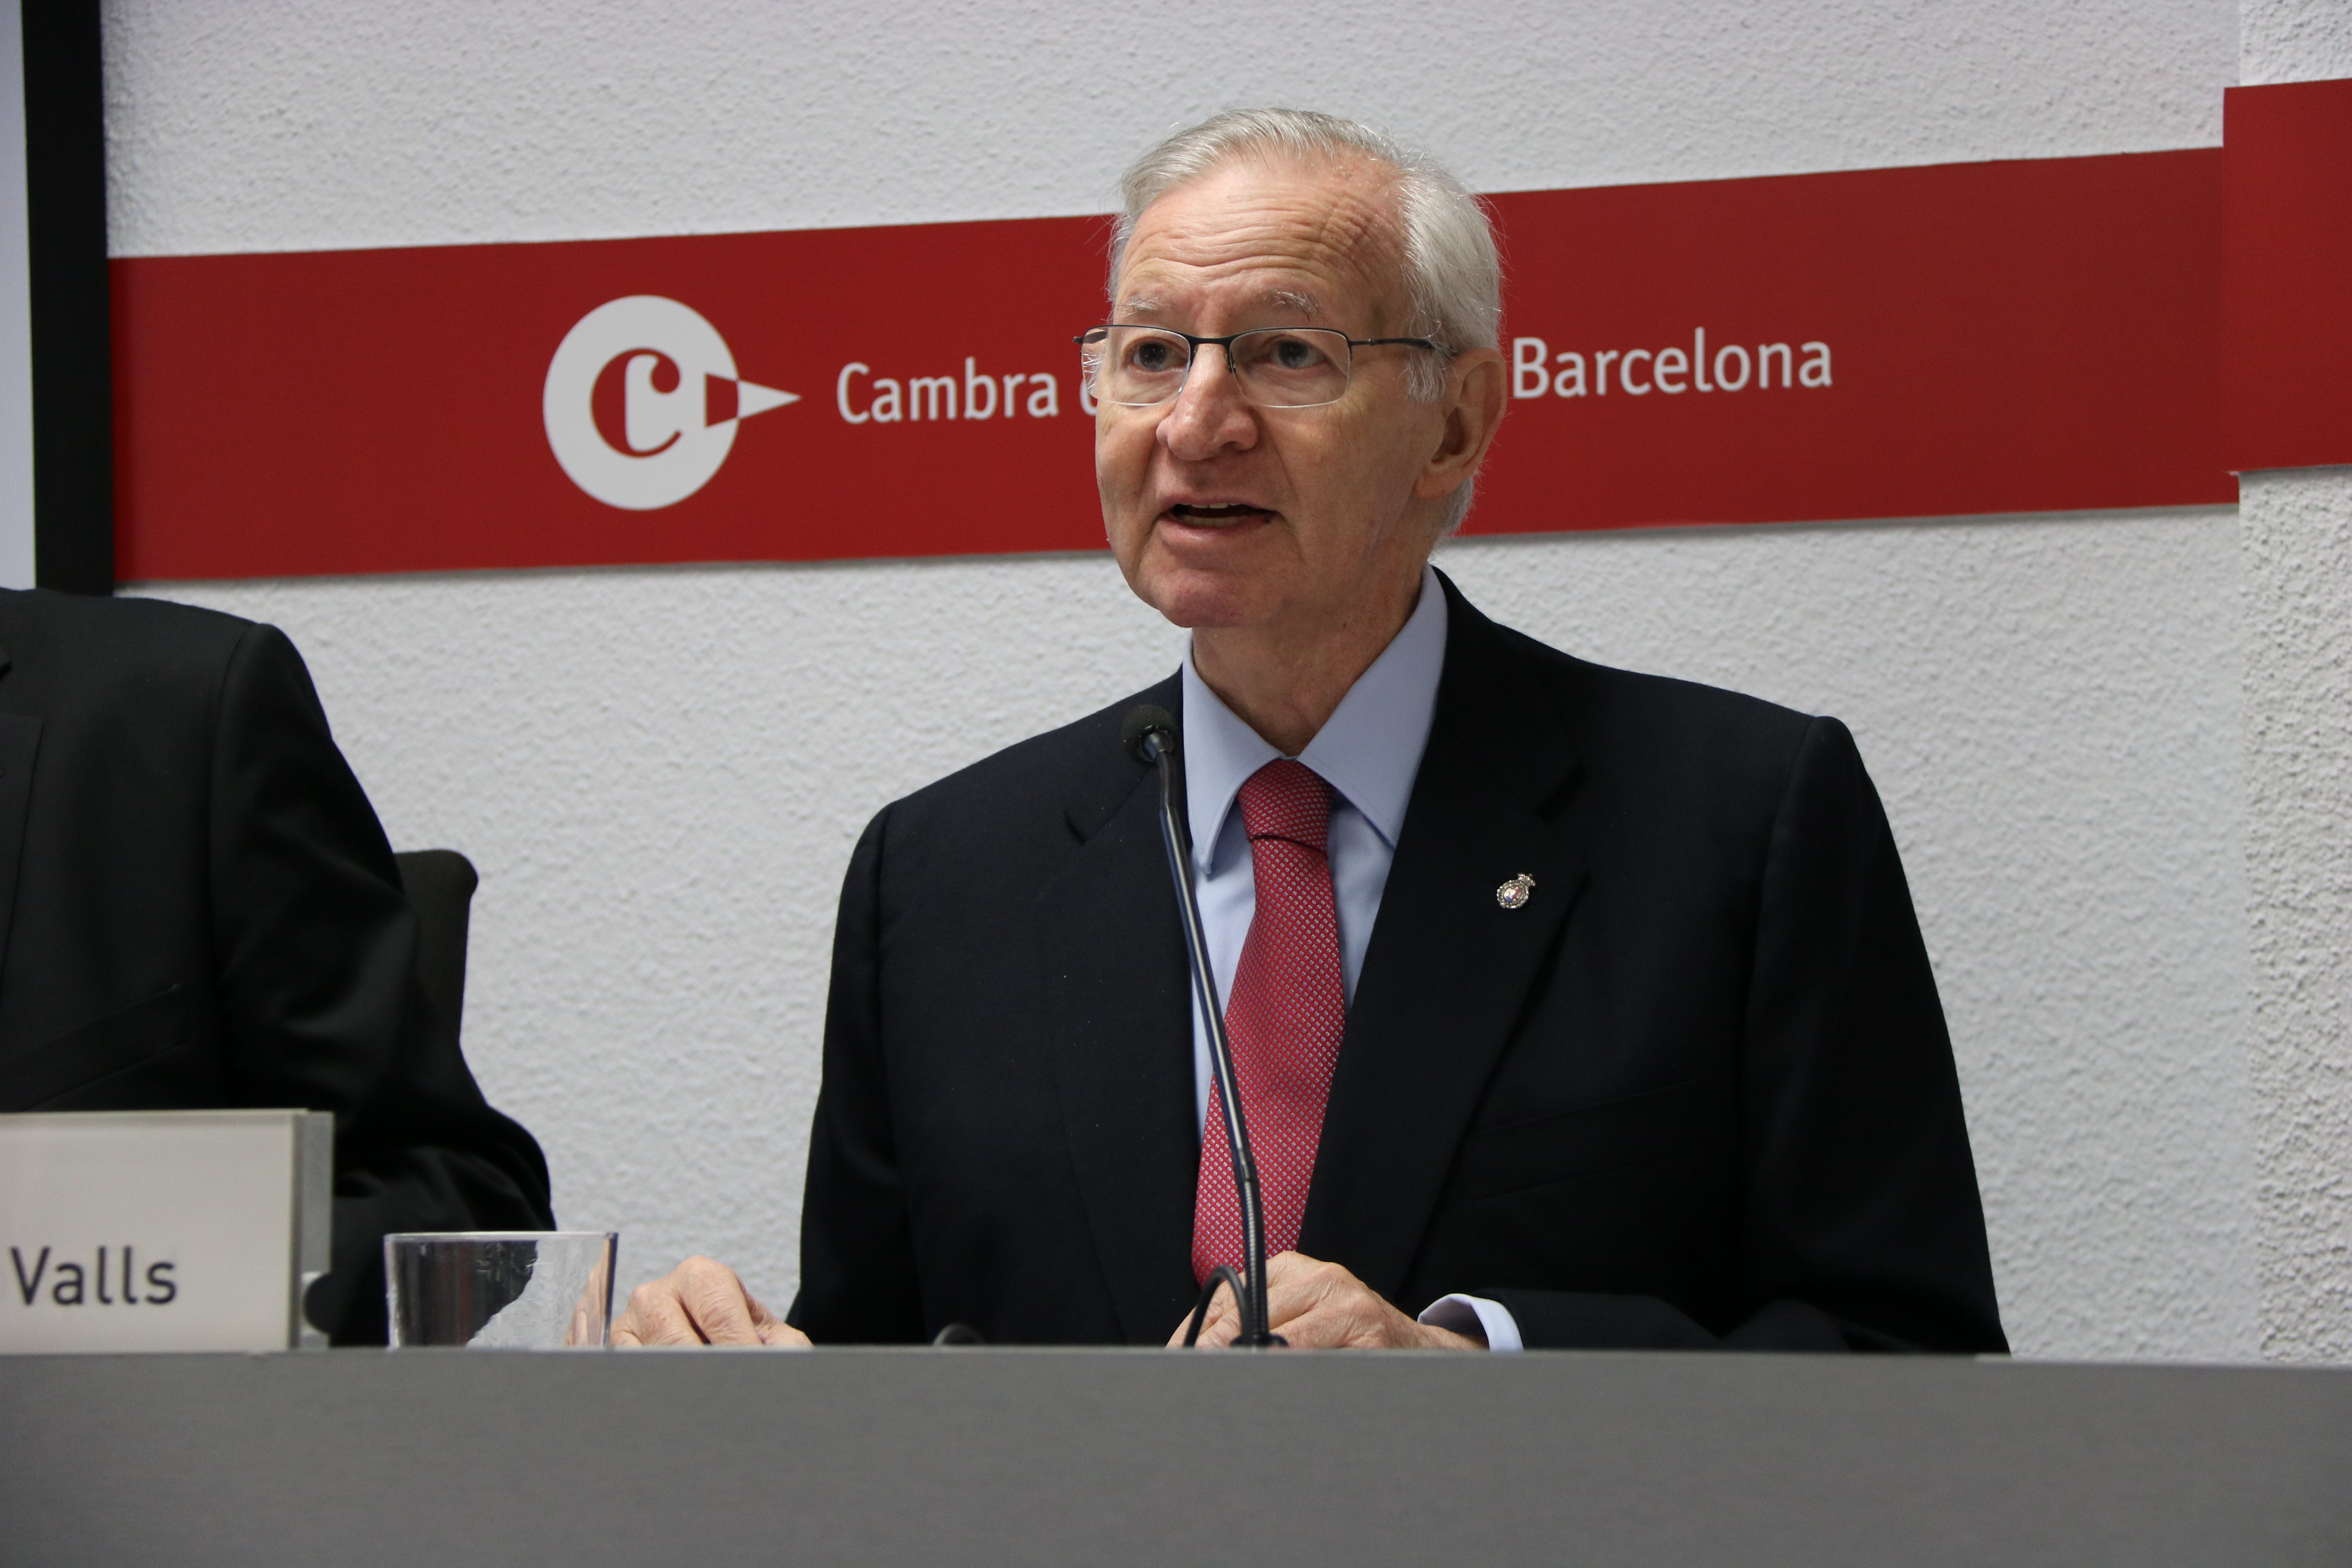 President of Barcelona's Chamber of Commerce at a press conference on 24 October (by ACN)